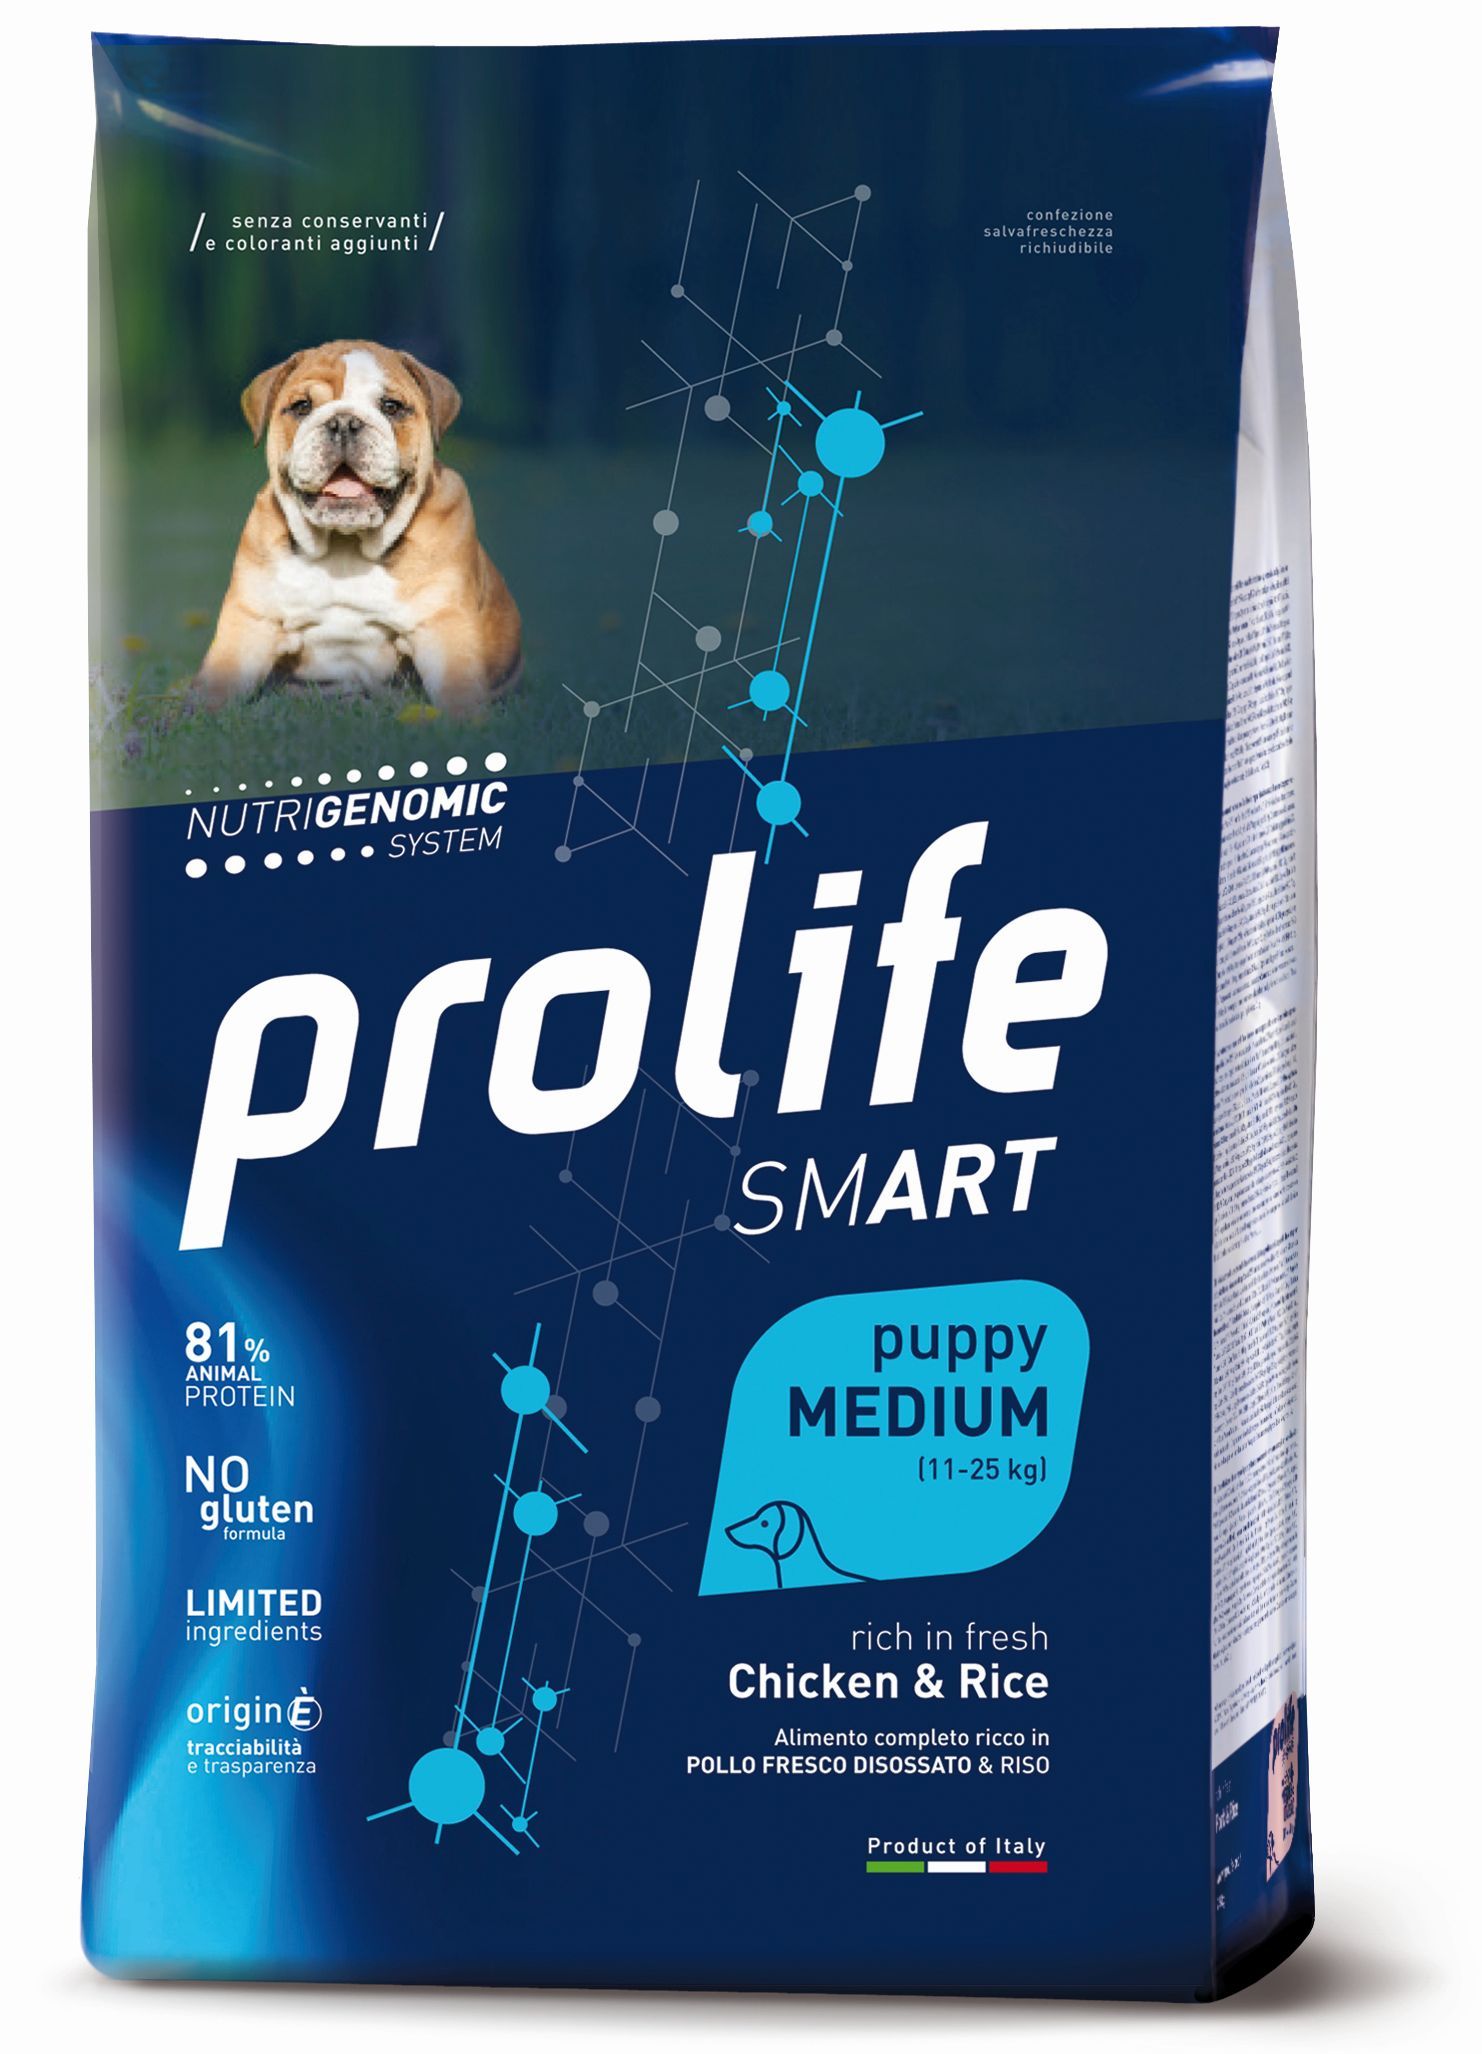 Complete pet food, rich in fresh deboned chicken and rice for small breed puppies
